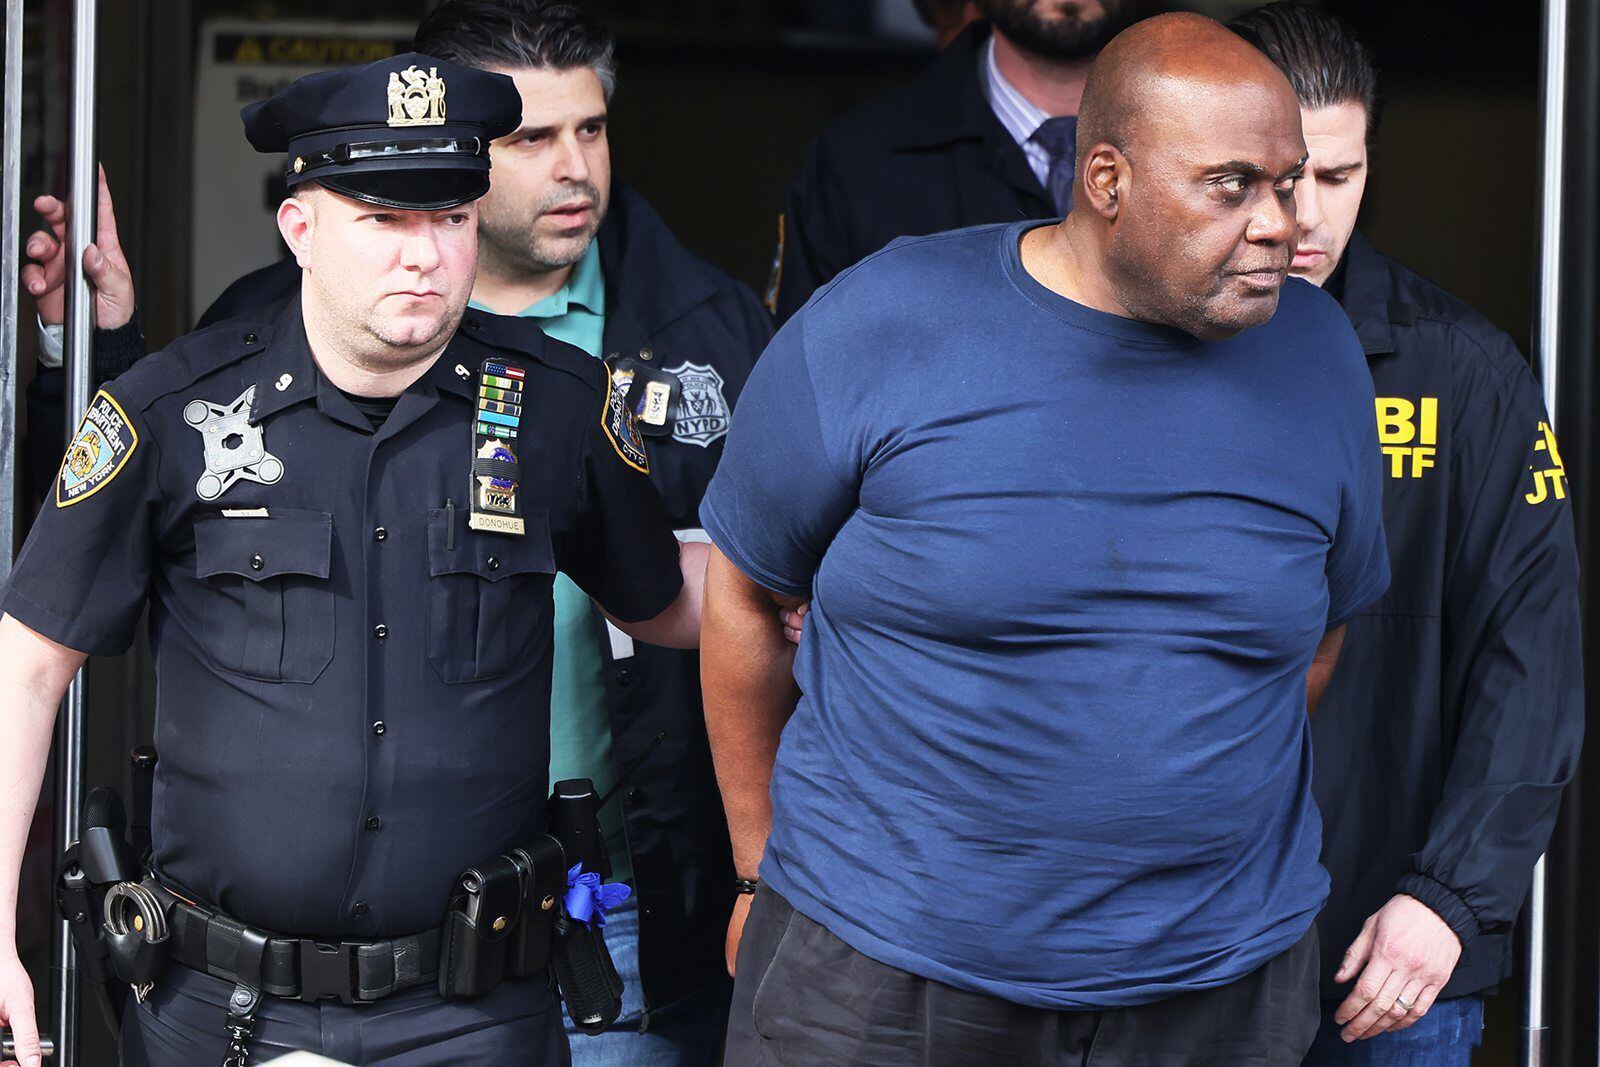 Painter Helps Police Arrest Brooklyn Subway Shooter